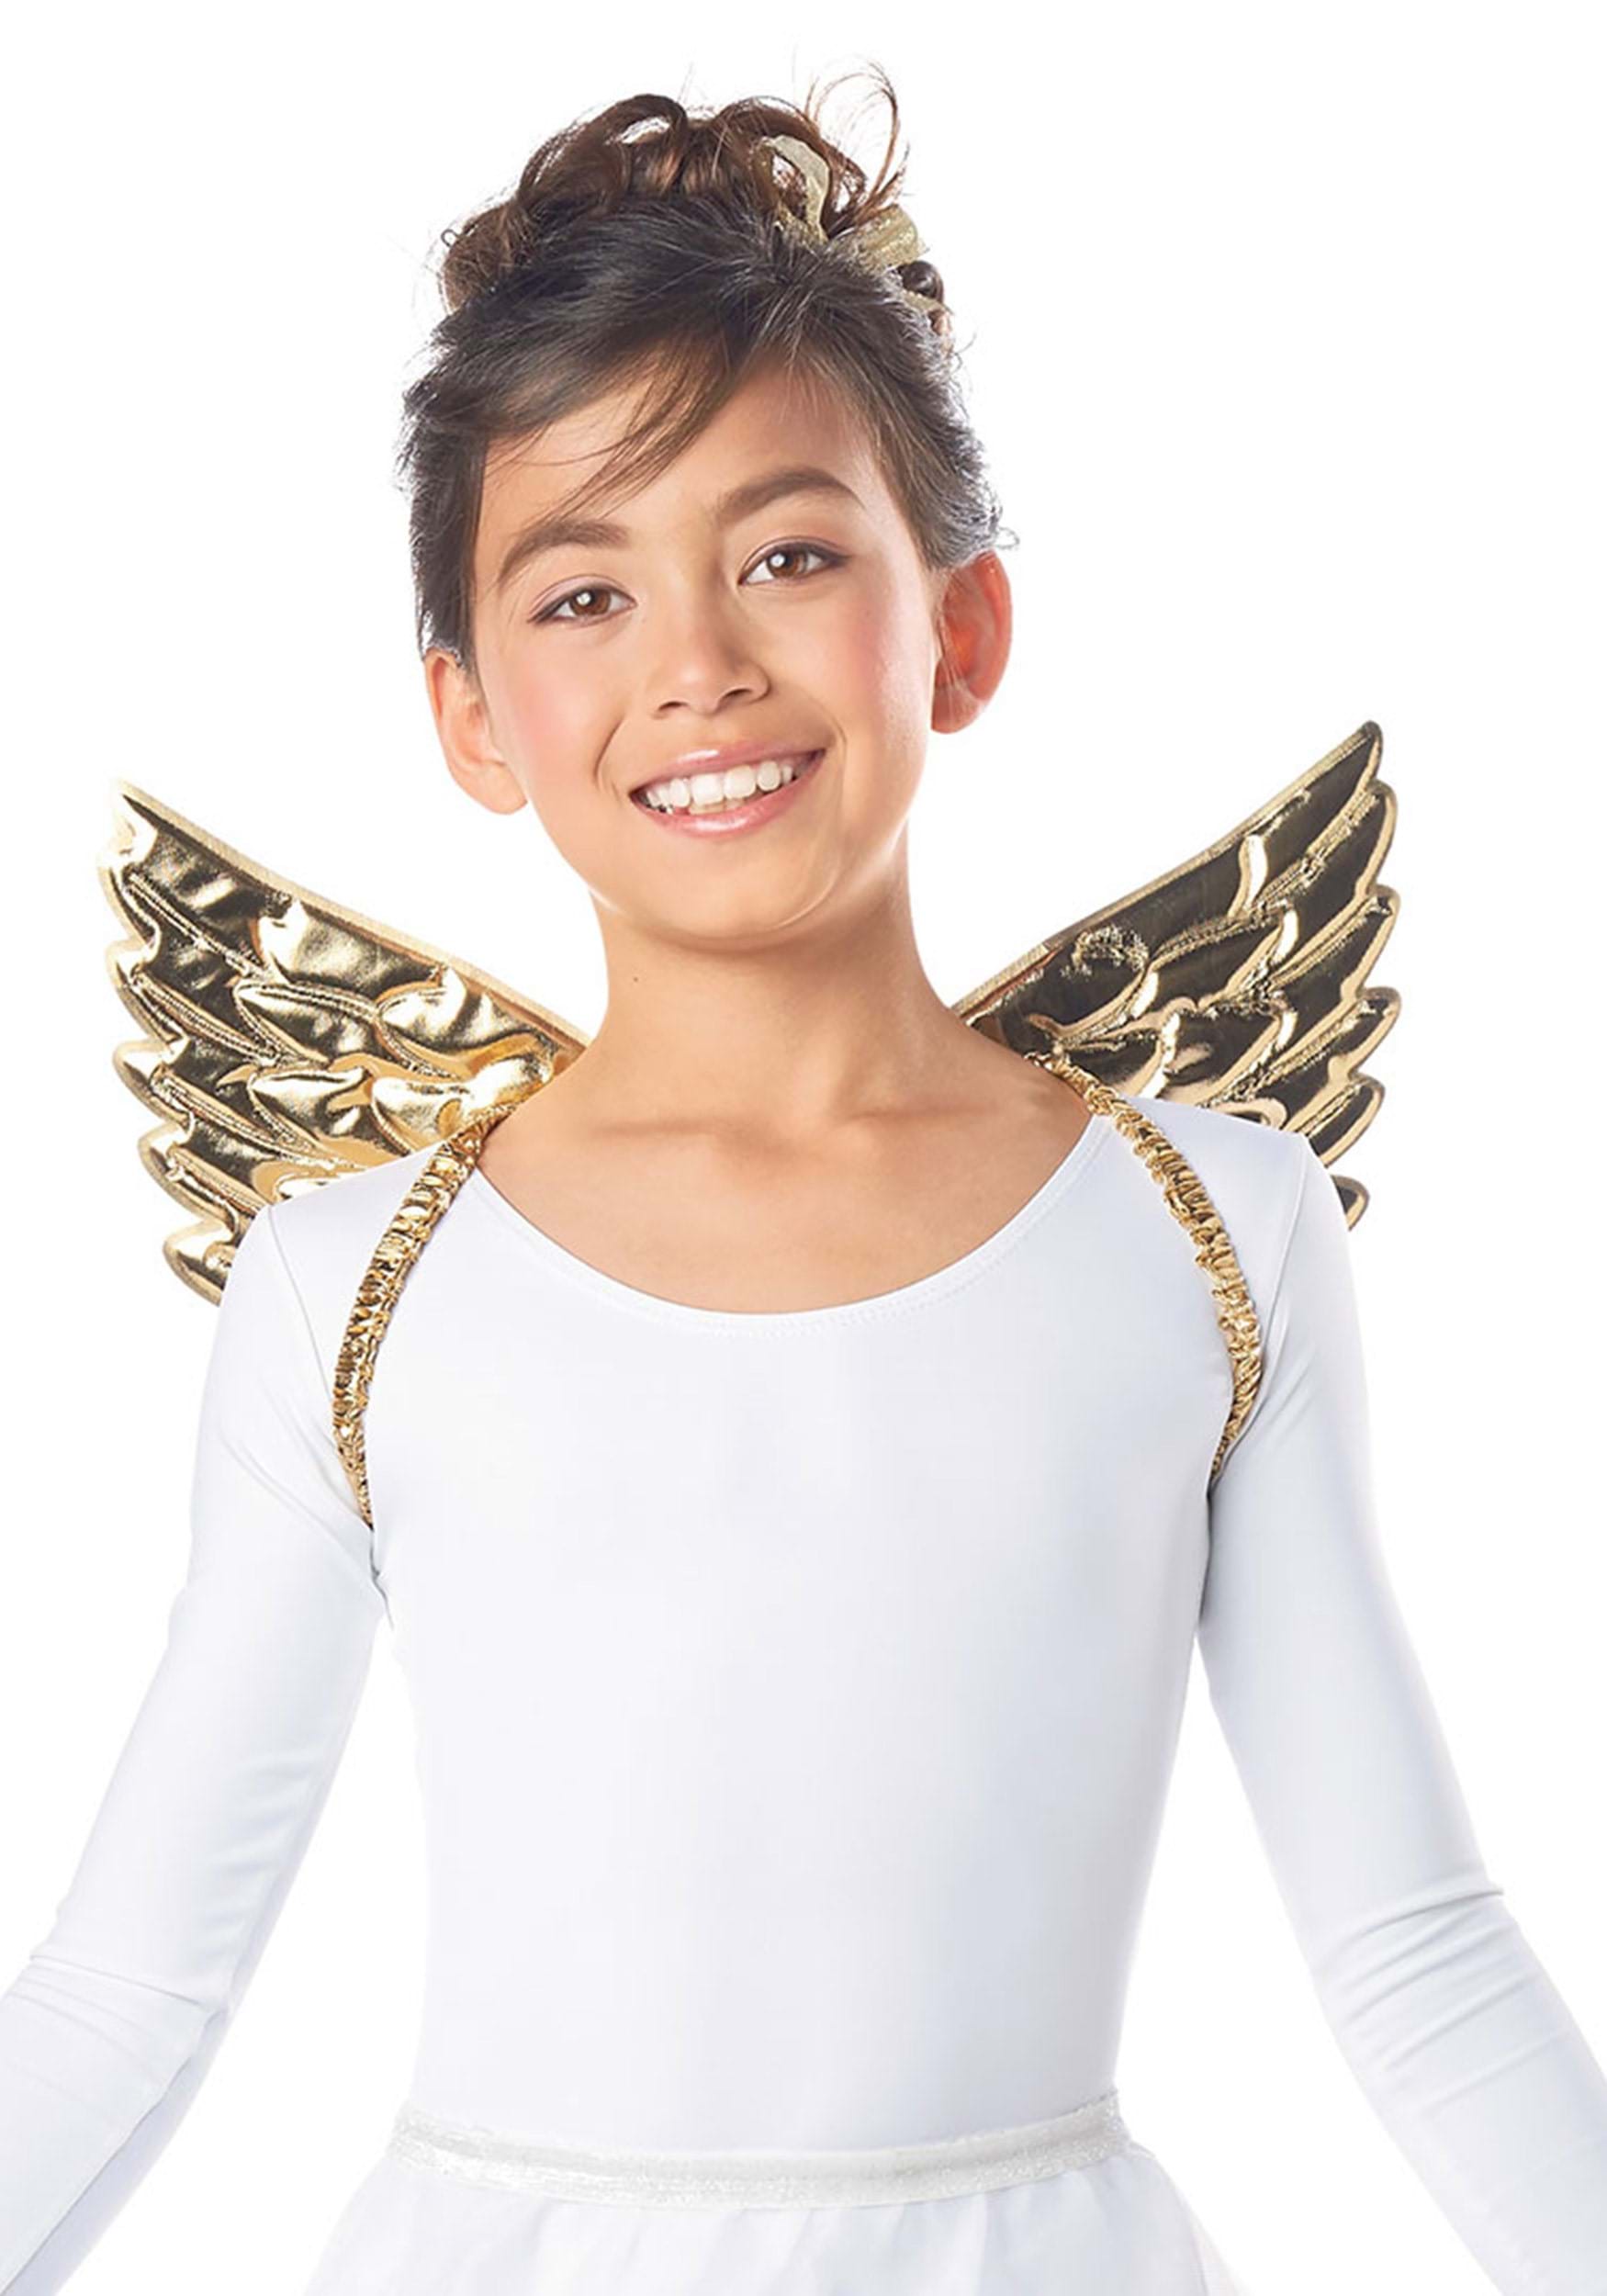 Child Angel Wing Accessories